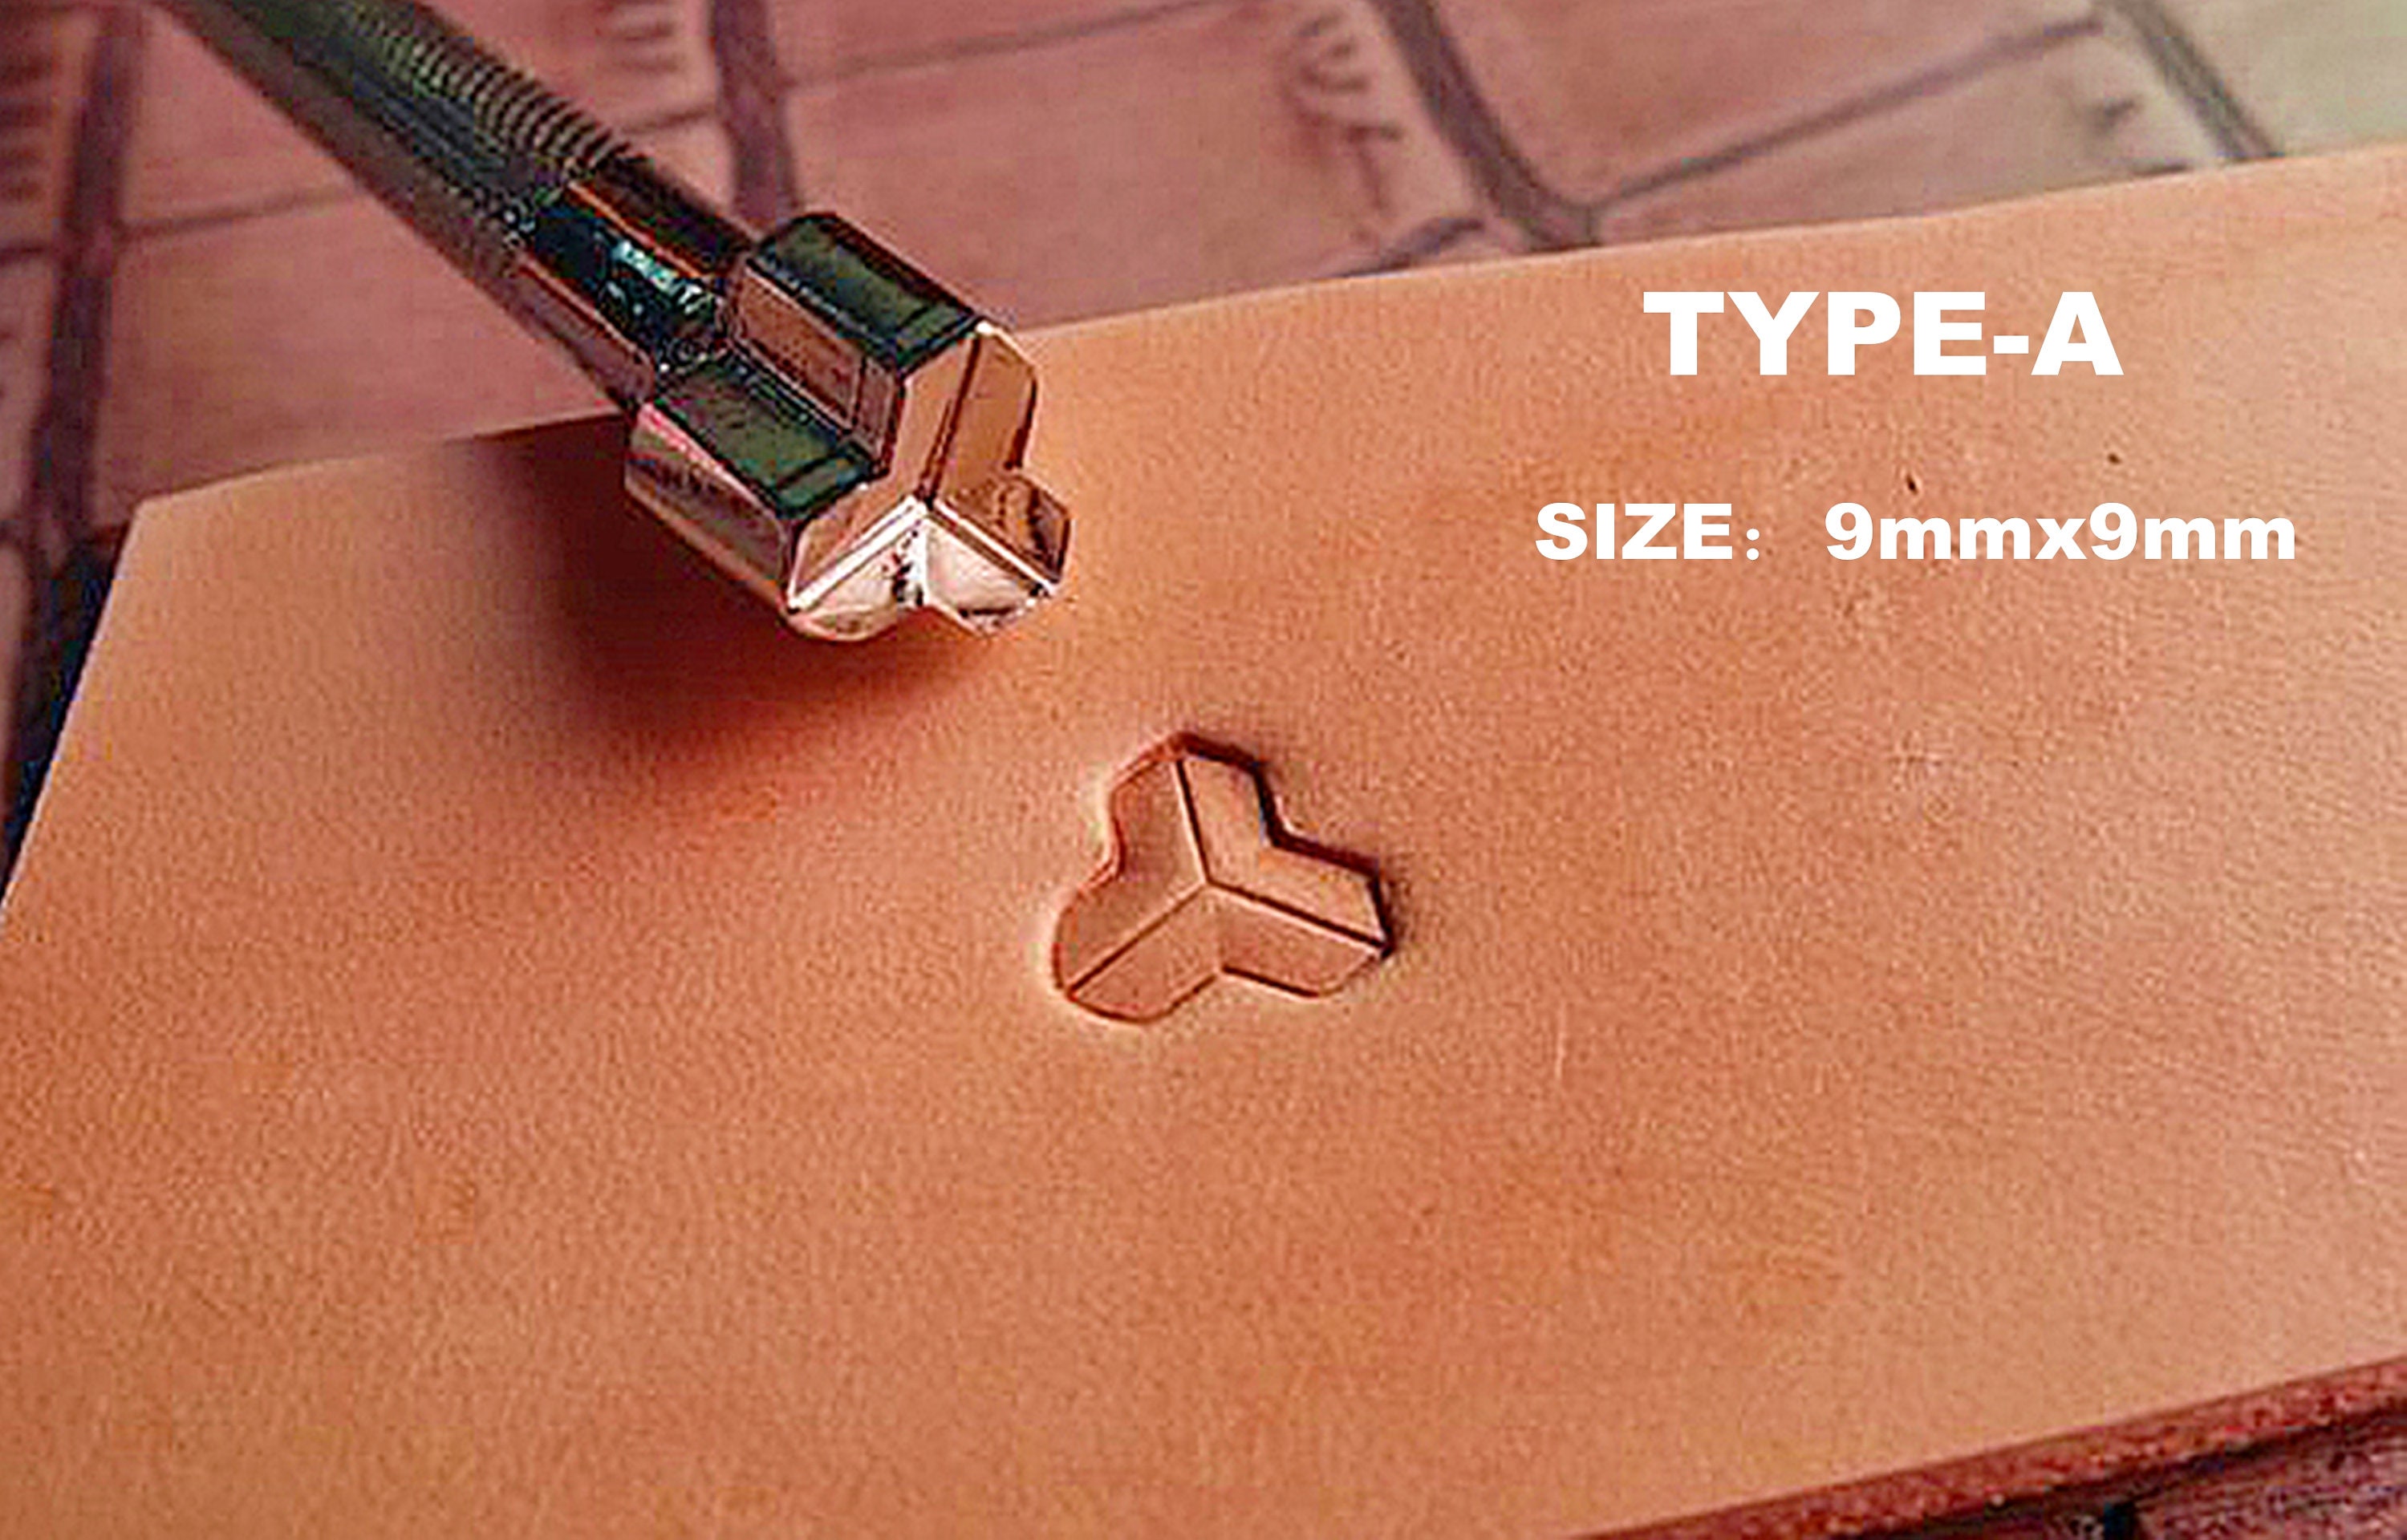 Leather Stamping Tools-carving Leather Craft Stamps Tools,stamping  Punches,art Stamp-leather Working Saddle Making Tools 